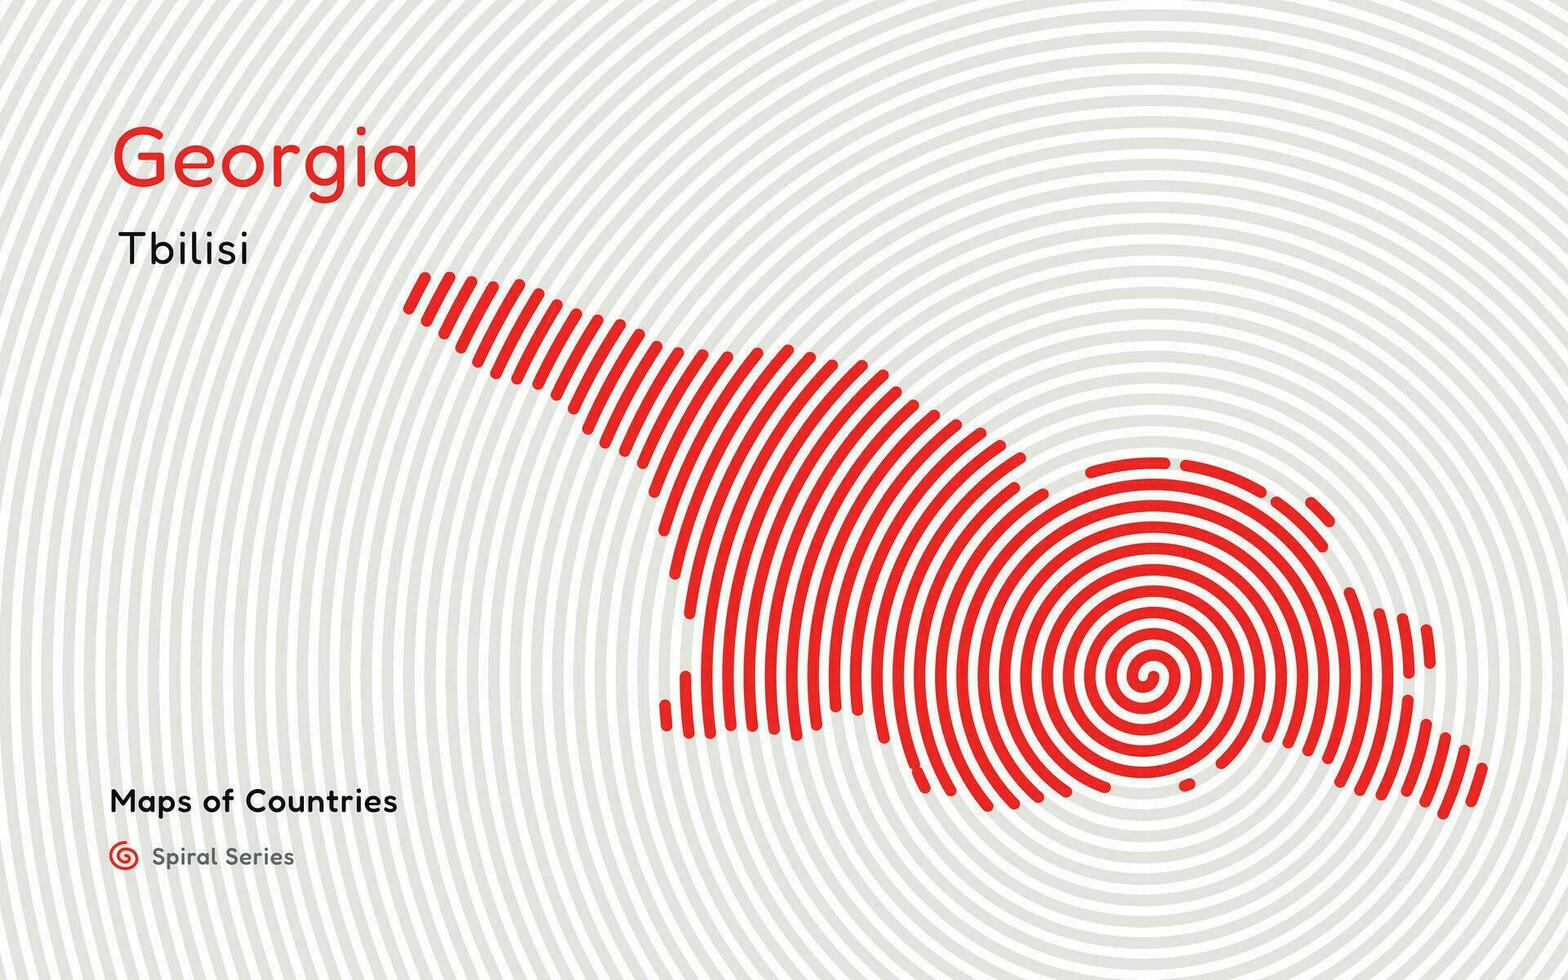 Isolated abstract spiral vector hatched map of Georgia on a white background, identifying its capital city, Tbilisi. Spiral fingerprint series